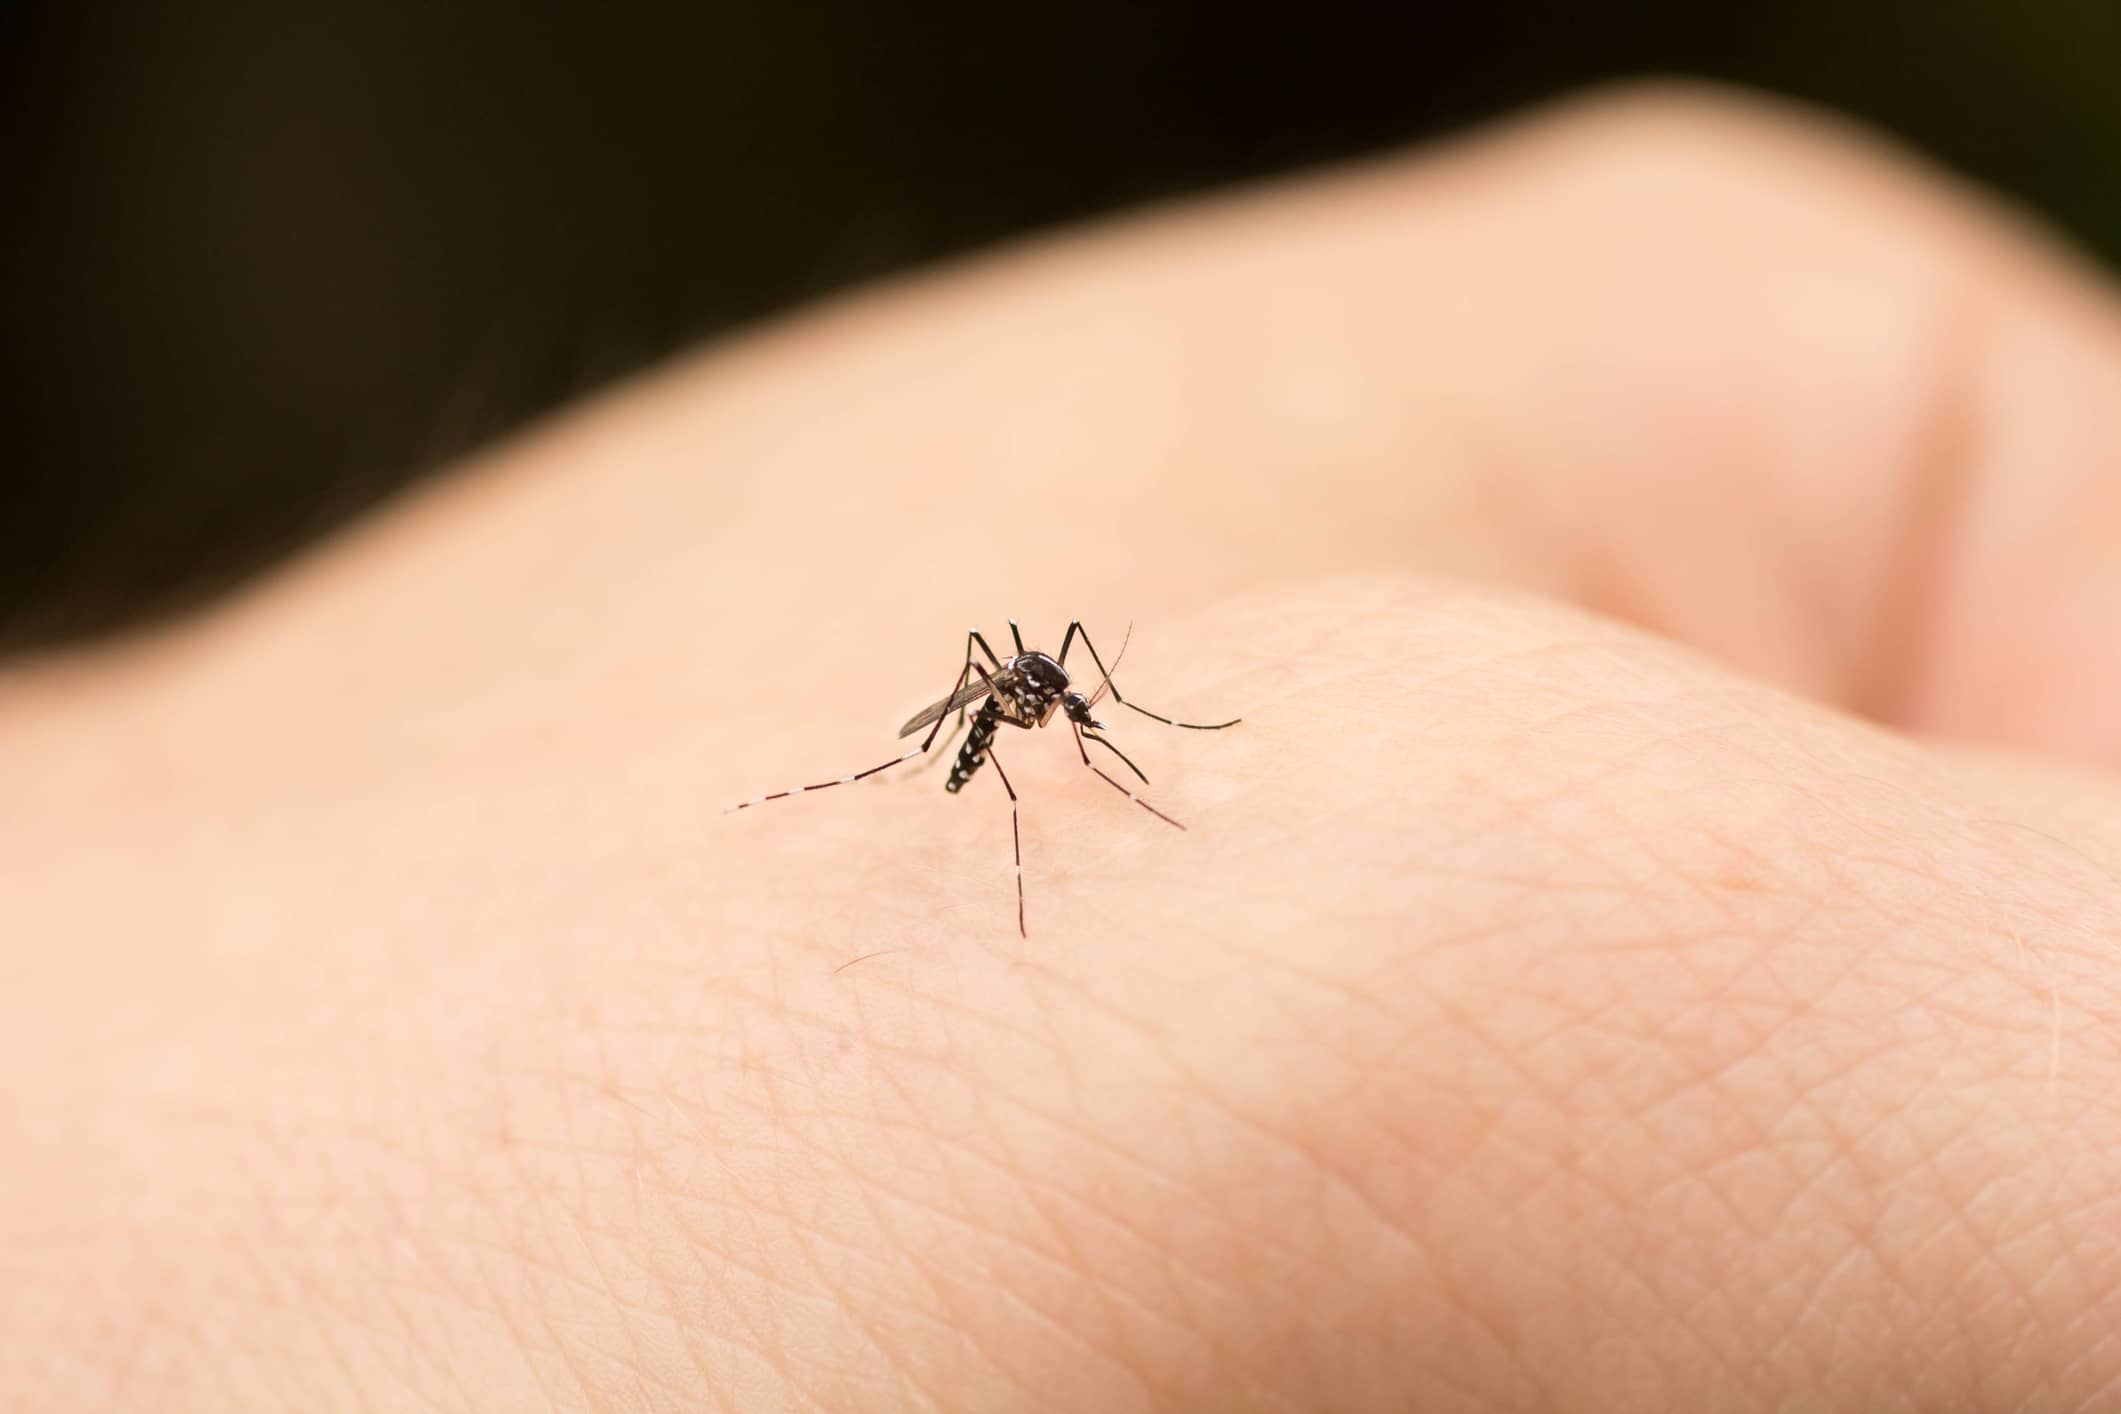 Mosquito bites: What they look like and how to treat them